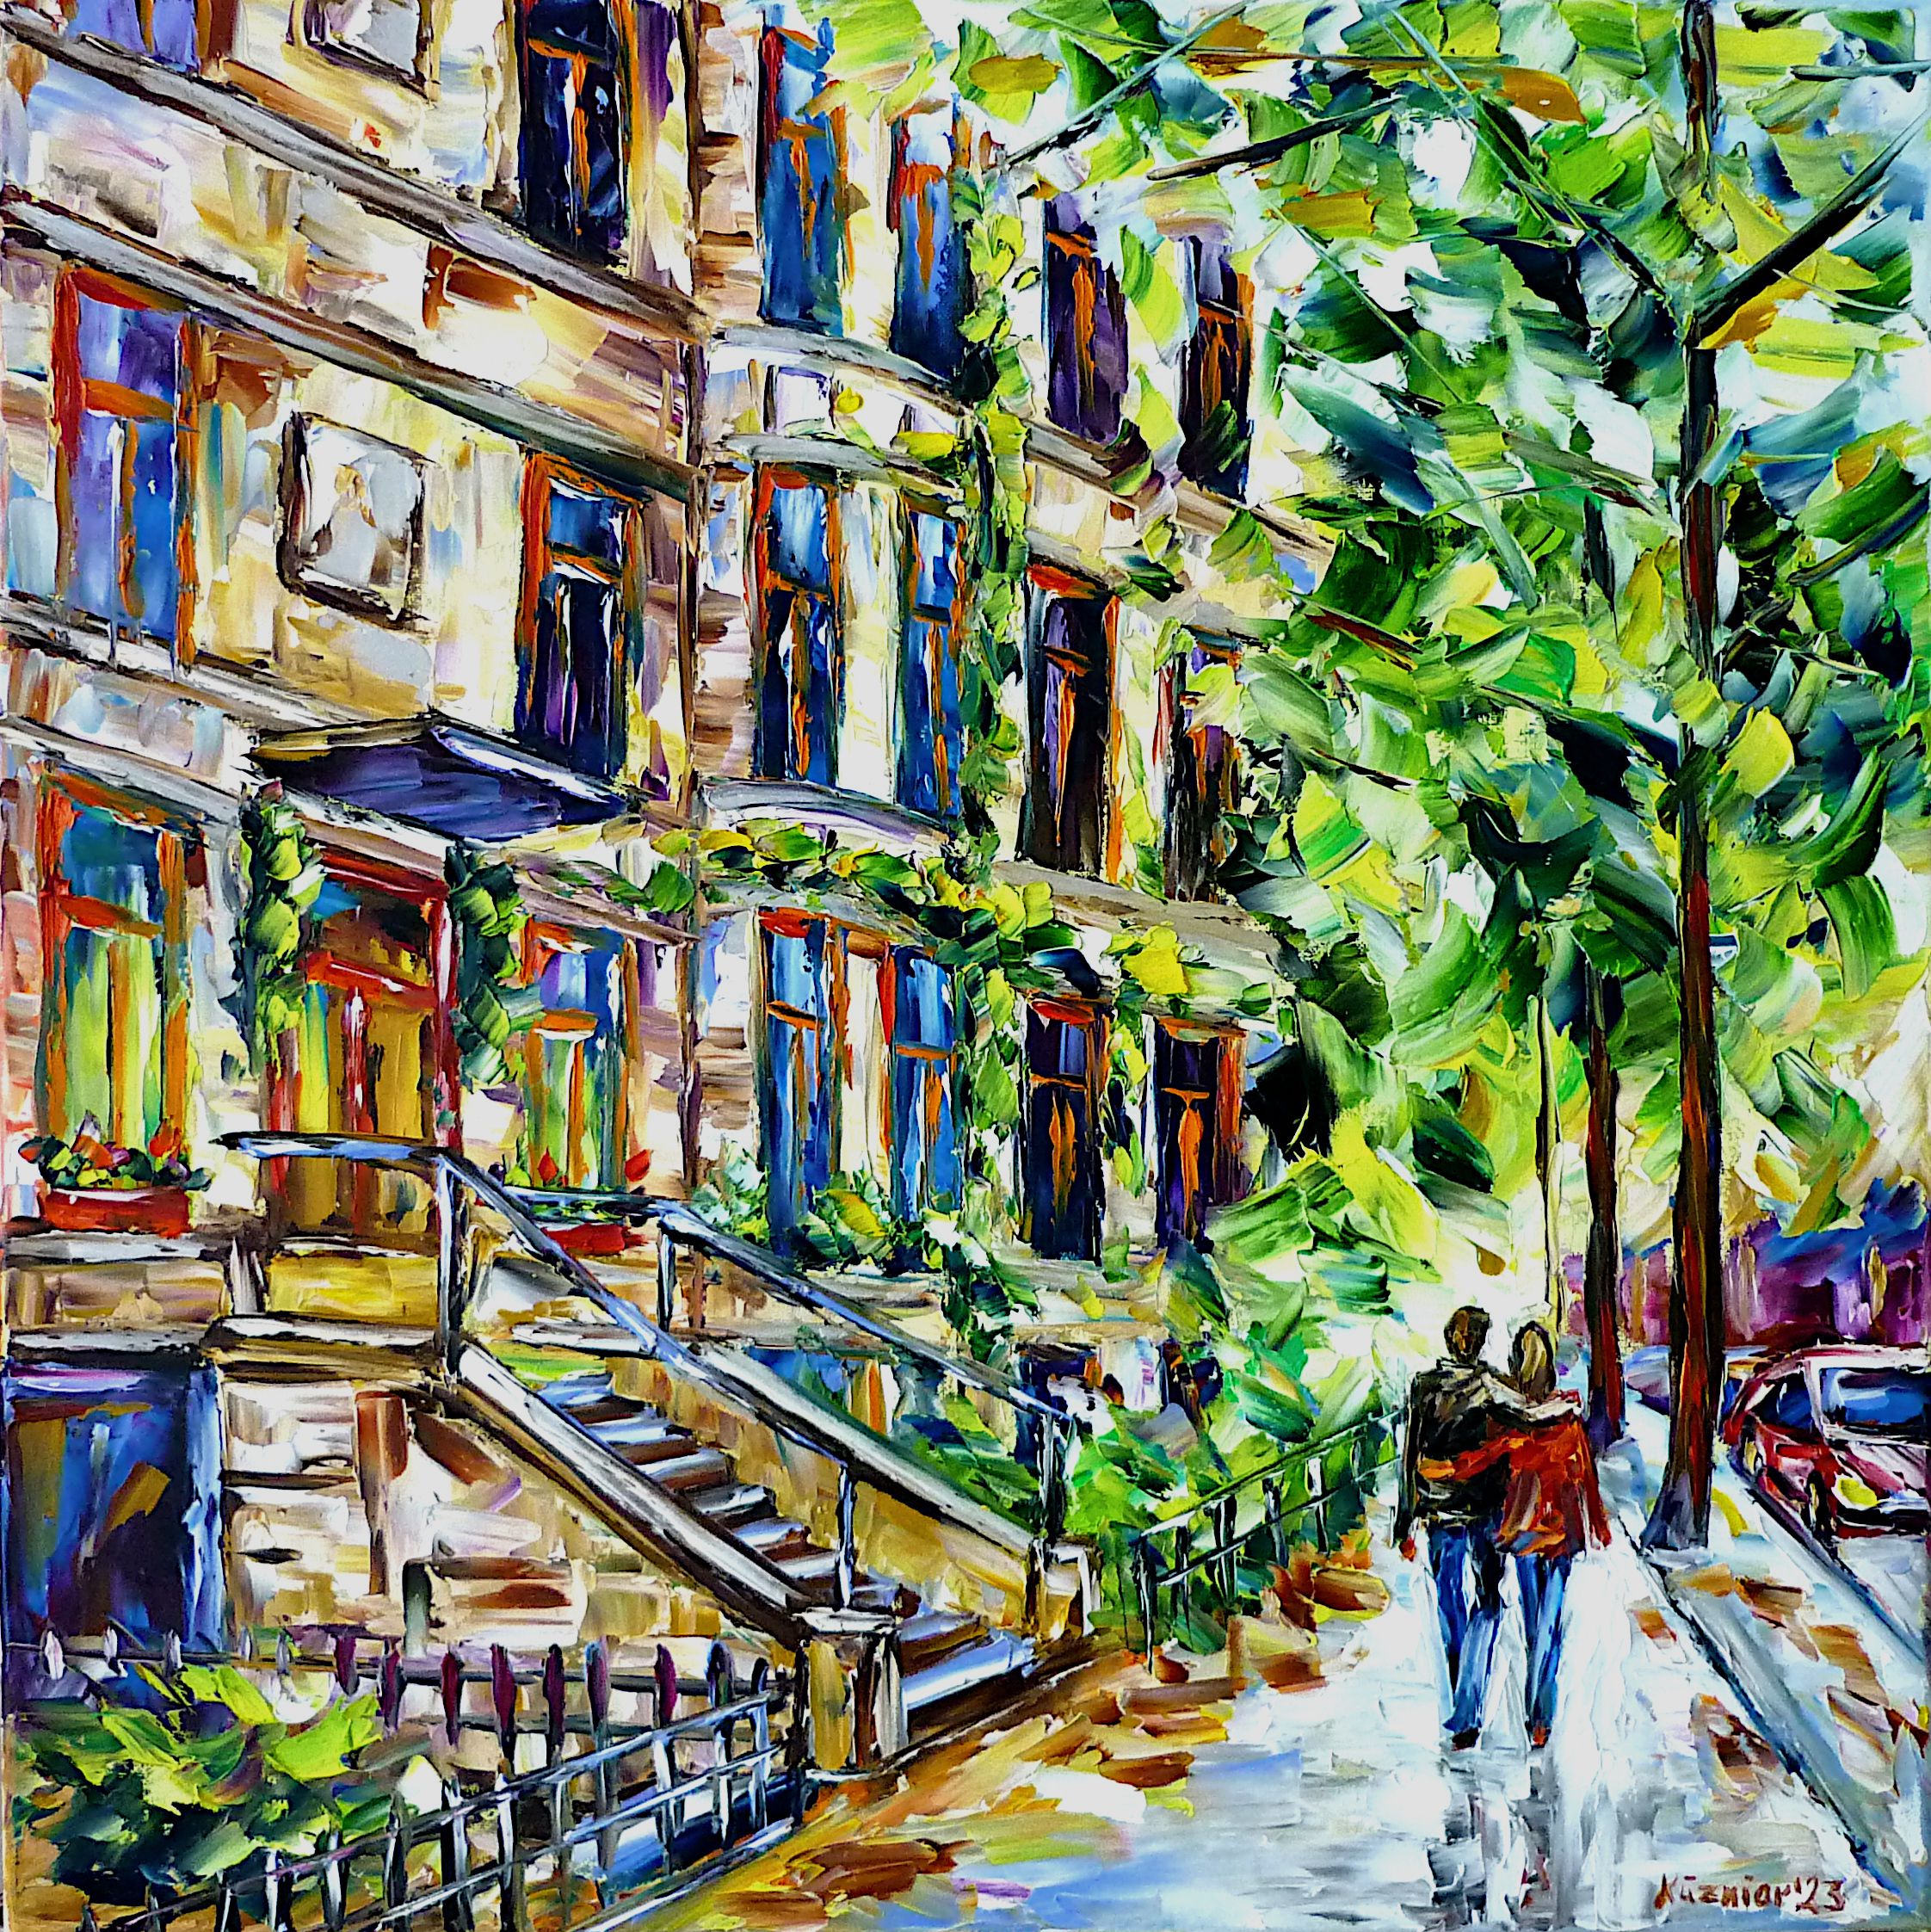 montreal streets,montreal street scene,love couple in montreal,lovers in montreal,people in love,romantic scene,romantic day,montreal house,staircase,green montreal,love,love and romance,sunny day,walking,romantic,city romance,montreal romance,Vieux-Montréal,Old Montreal scene,Montreal City painting,Montreal City Scene,Montreal Cityscape,Montreal Nature,Montreal Beauty,Montreal Beautiful,Montreal Painting,montreal art,montreal city life,people walking,strolling people,city stroll,city walk,vivid montreal,canada,montreal love,montreal lover,i love montreal,square painting,square format,square picture,palette knife oil painting,modern art,figurative art,figurative painting,contemporary painting,abstract painting,lively colors,colorful painting,bright colors,impasto painting